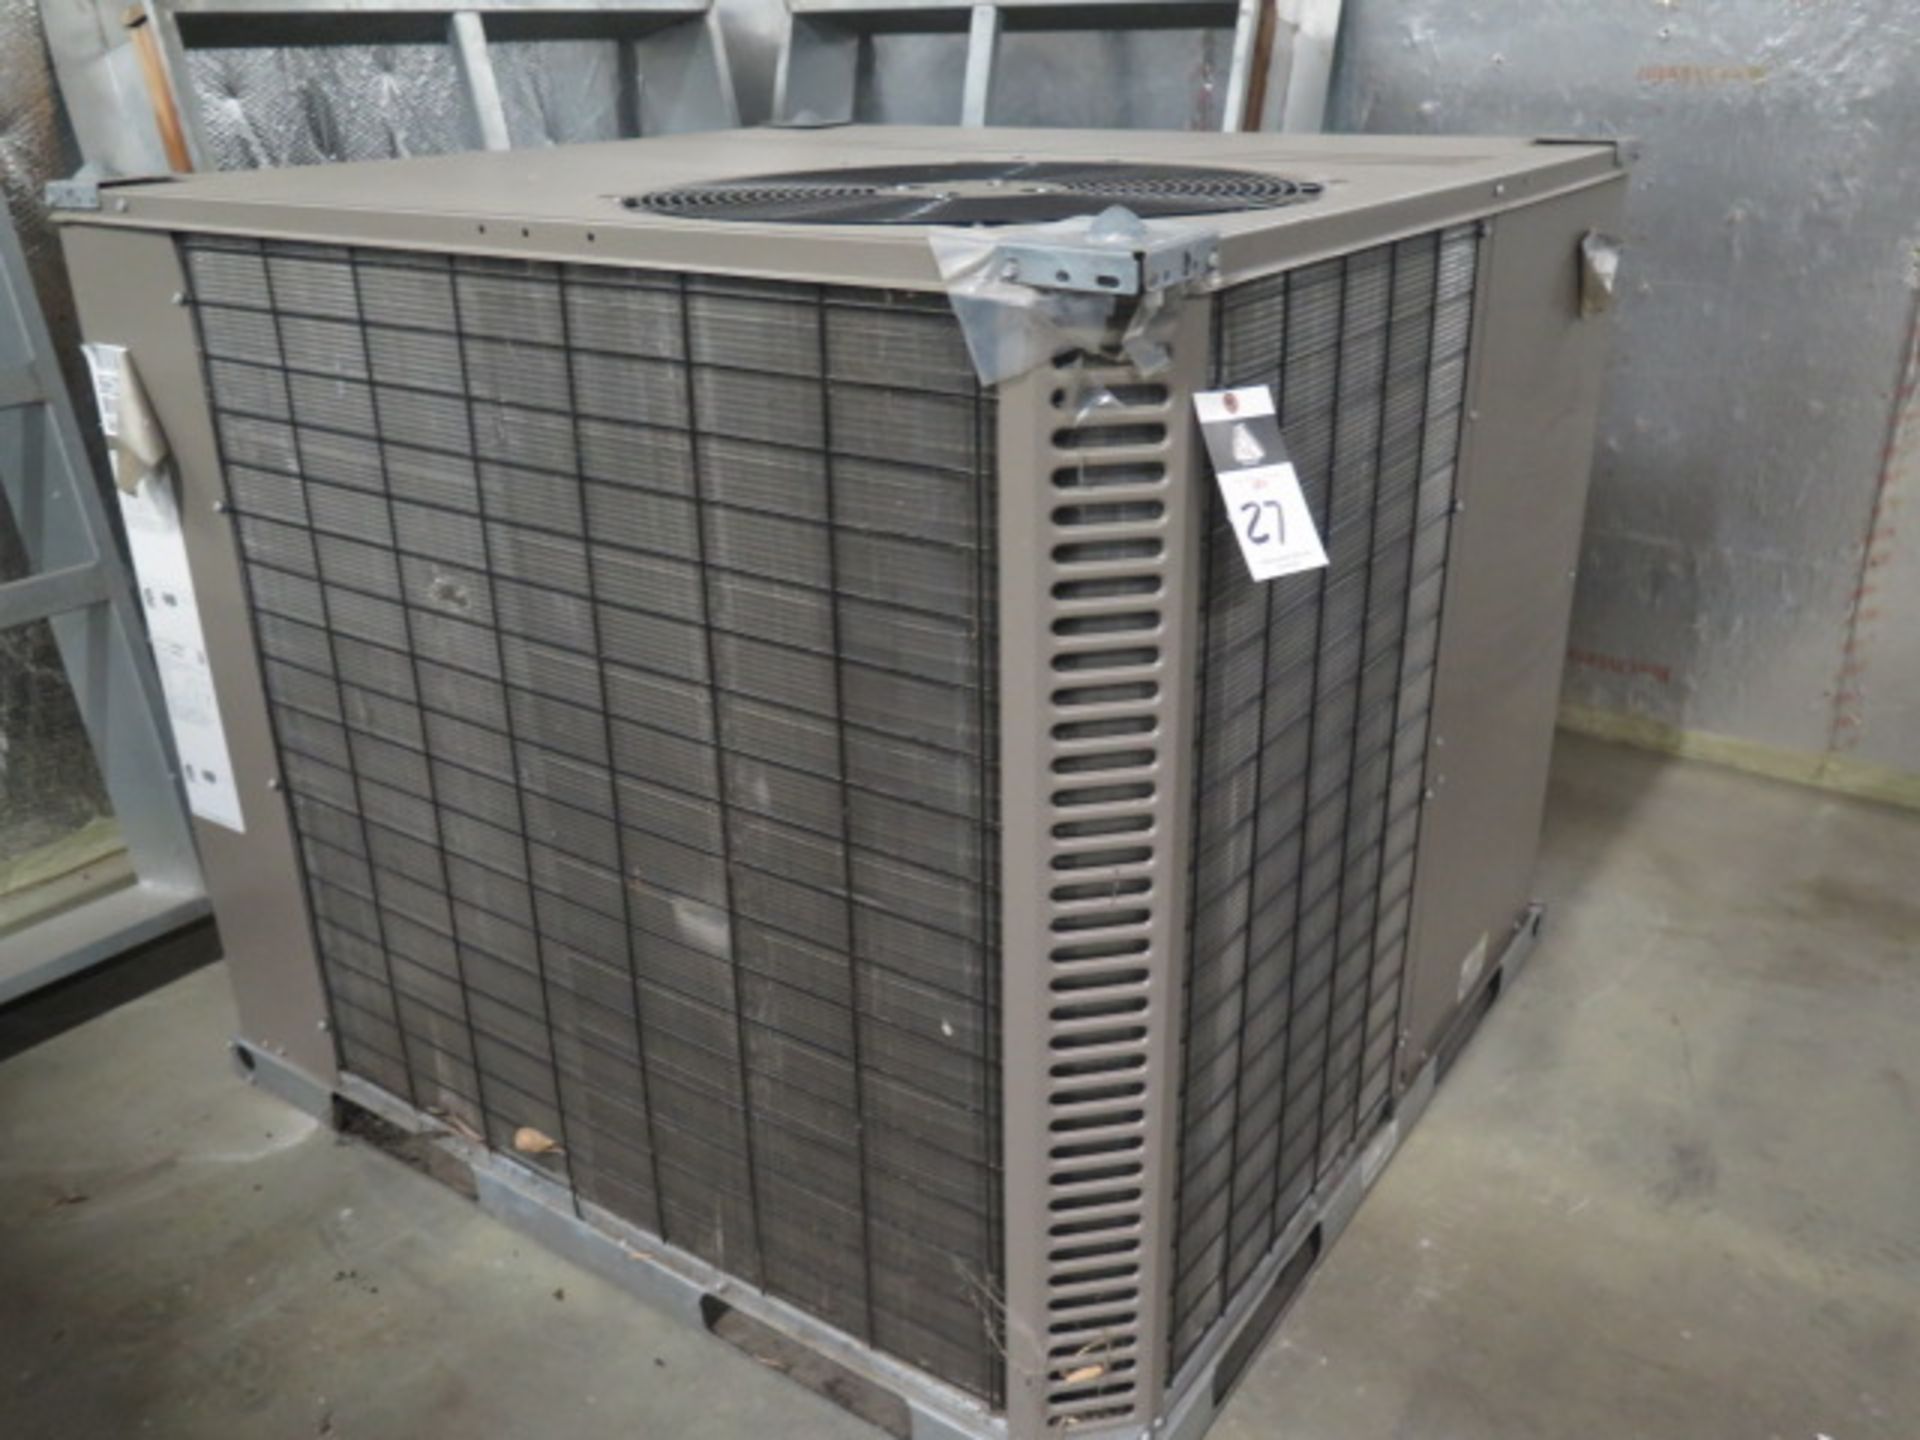 Johnson B6HZ042A25 3.5 Ton Central Heat Pump s/n W1H4011181 208/230V-3PH w/ Curb Base (SOLD AS-